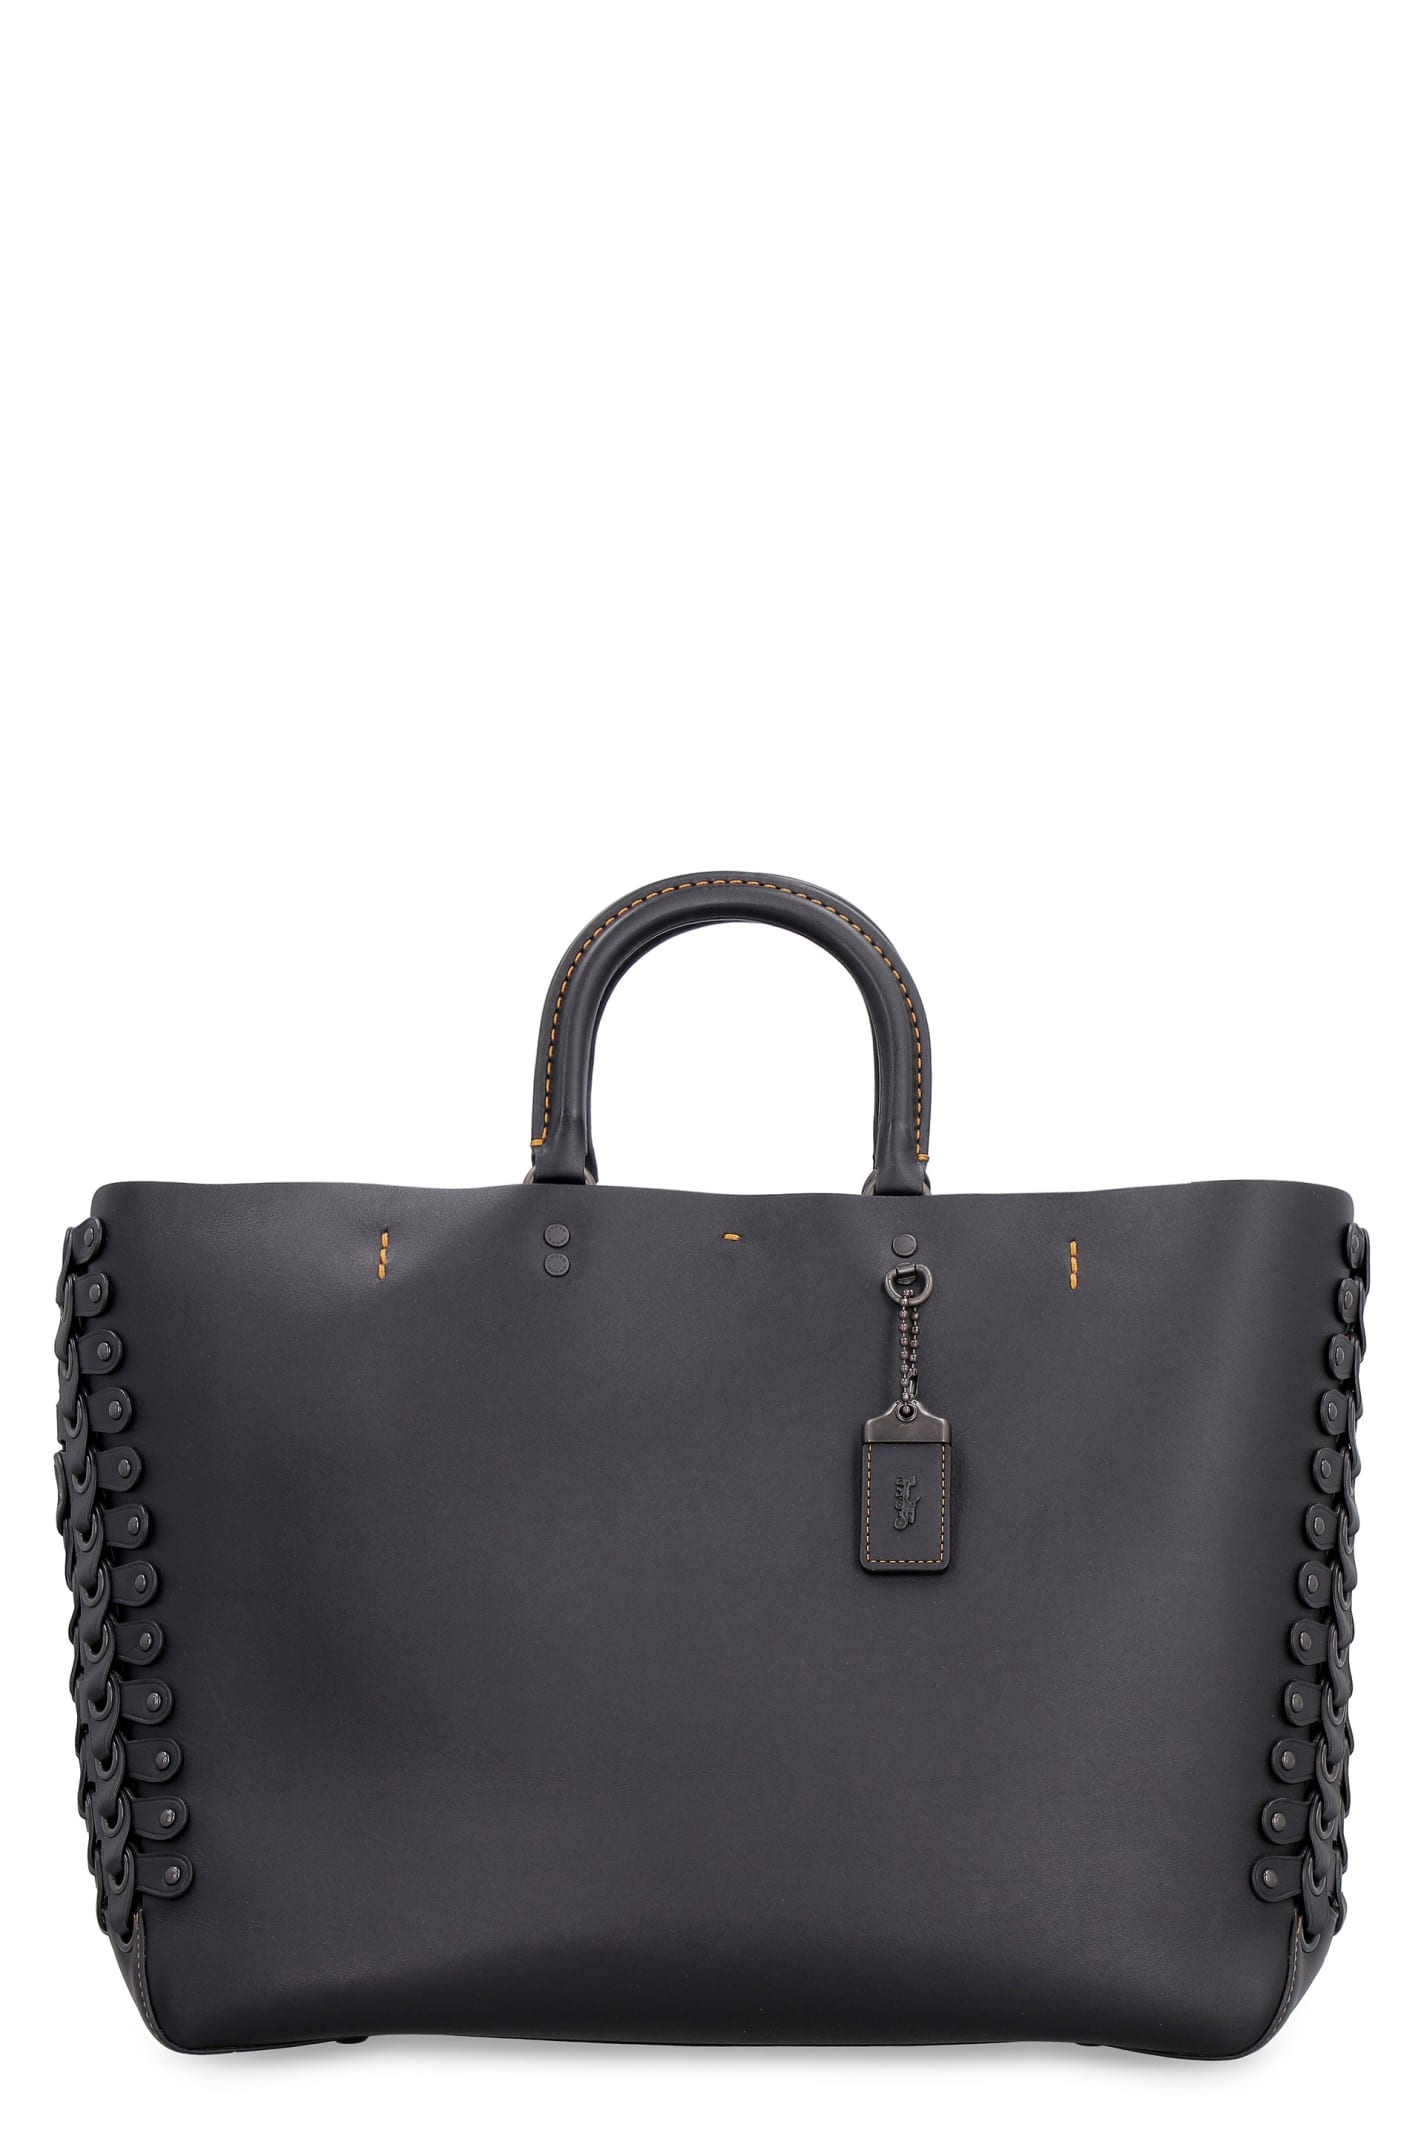 Coach Rogue Leather Tote